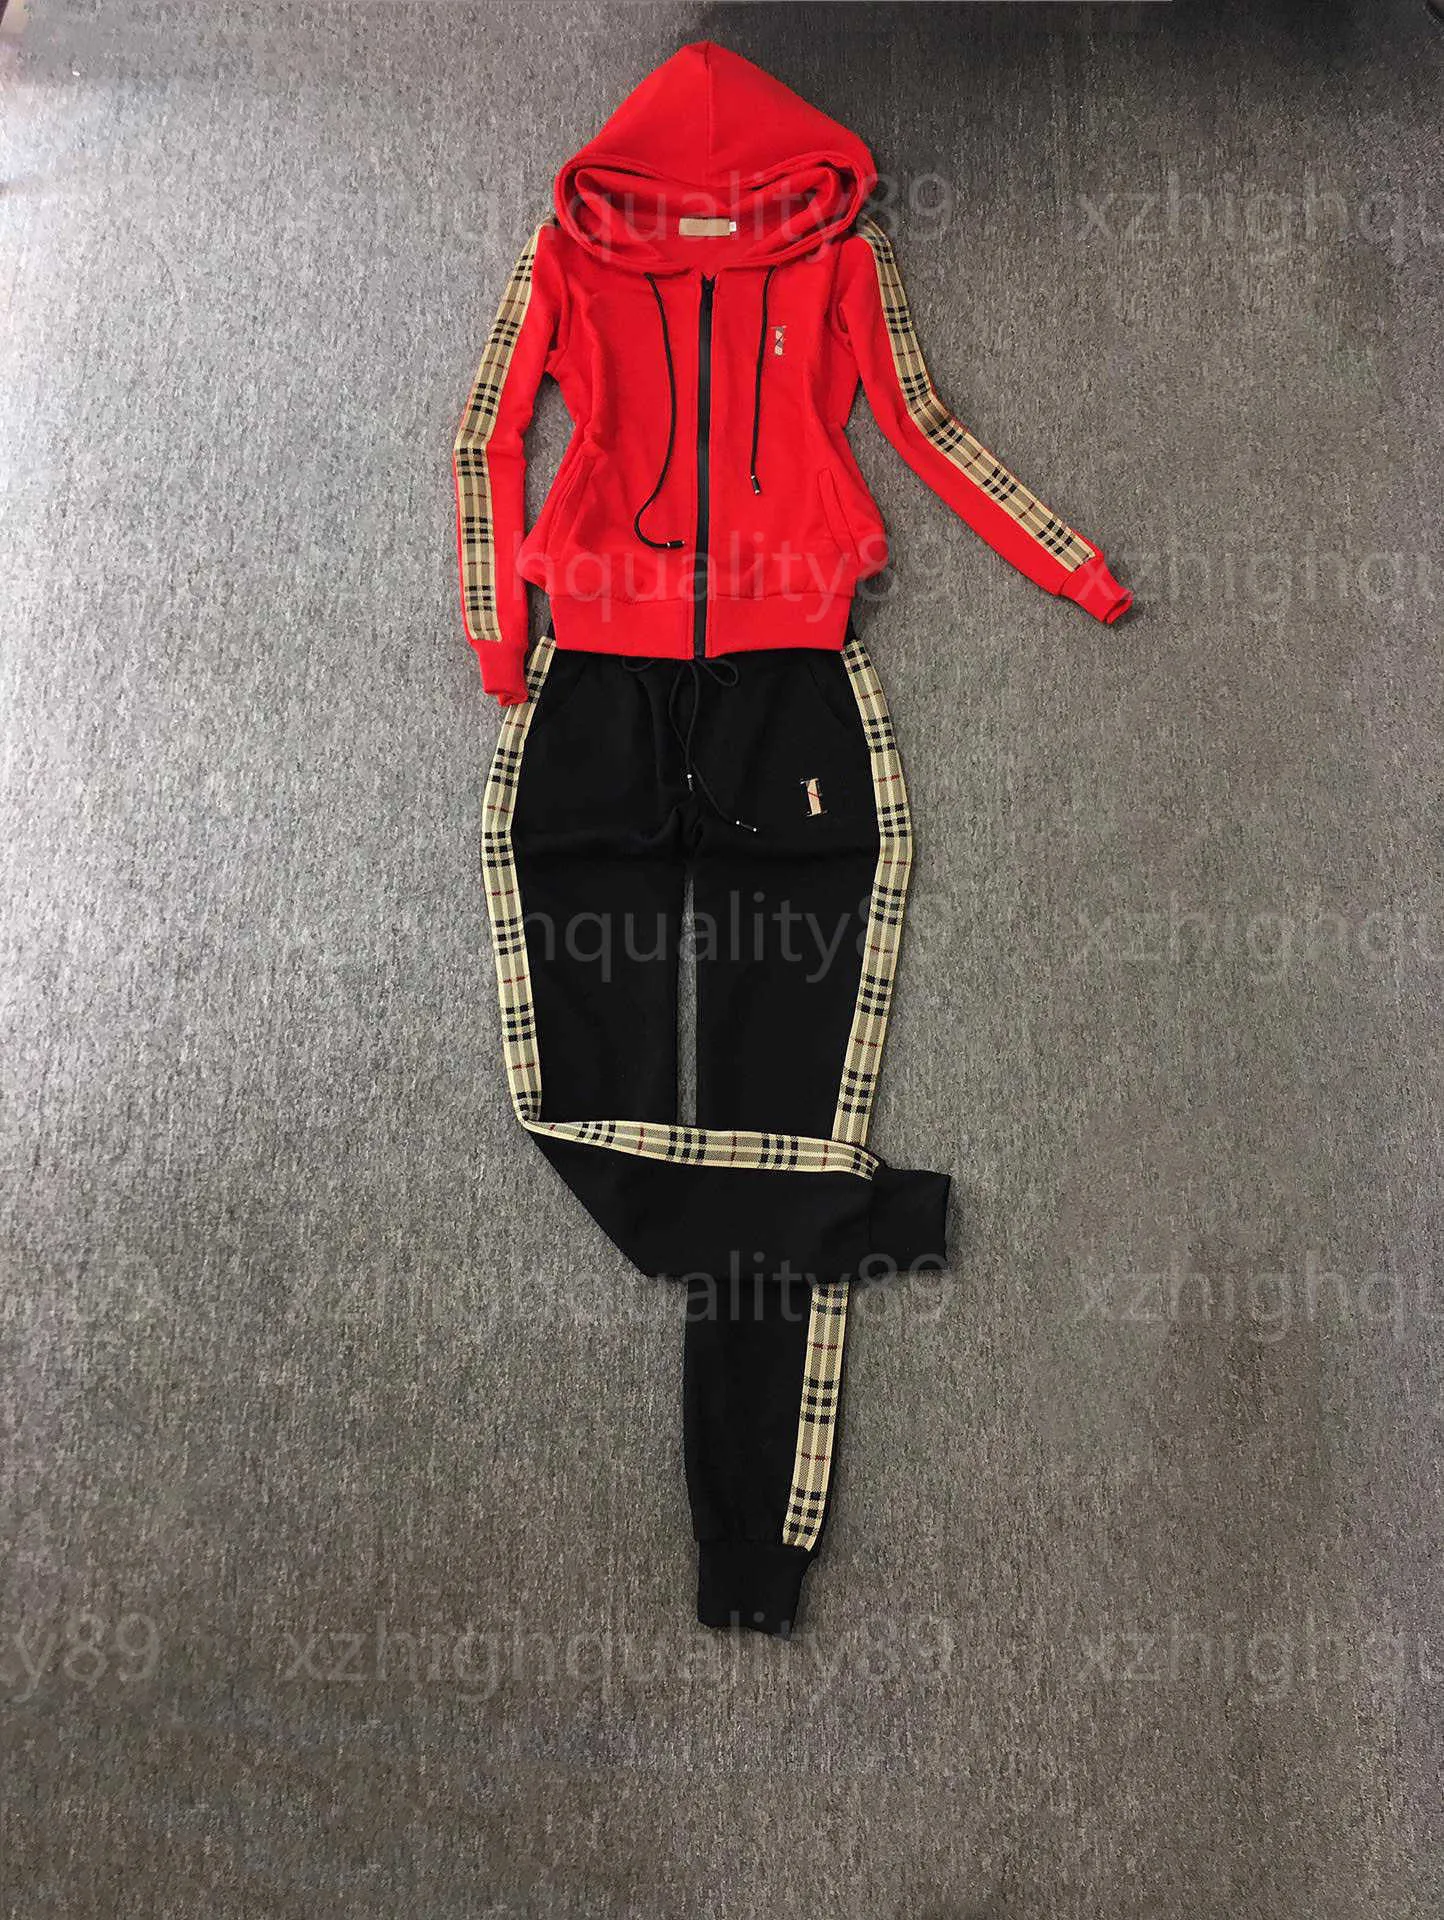 2 Piece Set Women Tracksuit Designer Tracksuits Womens Sweat Suits Casual Red Long Sleeved Hooded Jacket Black Sweatpants Fashion Designers Top And Pants Sets